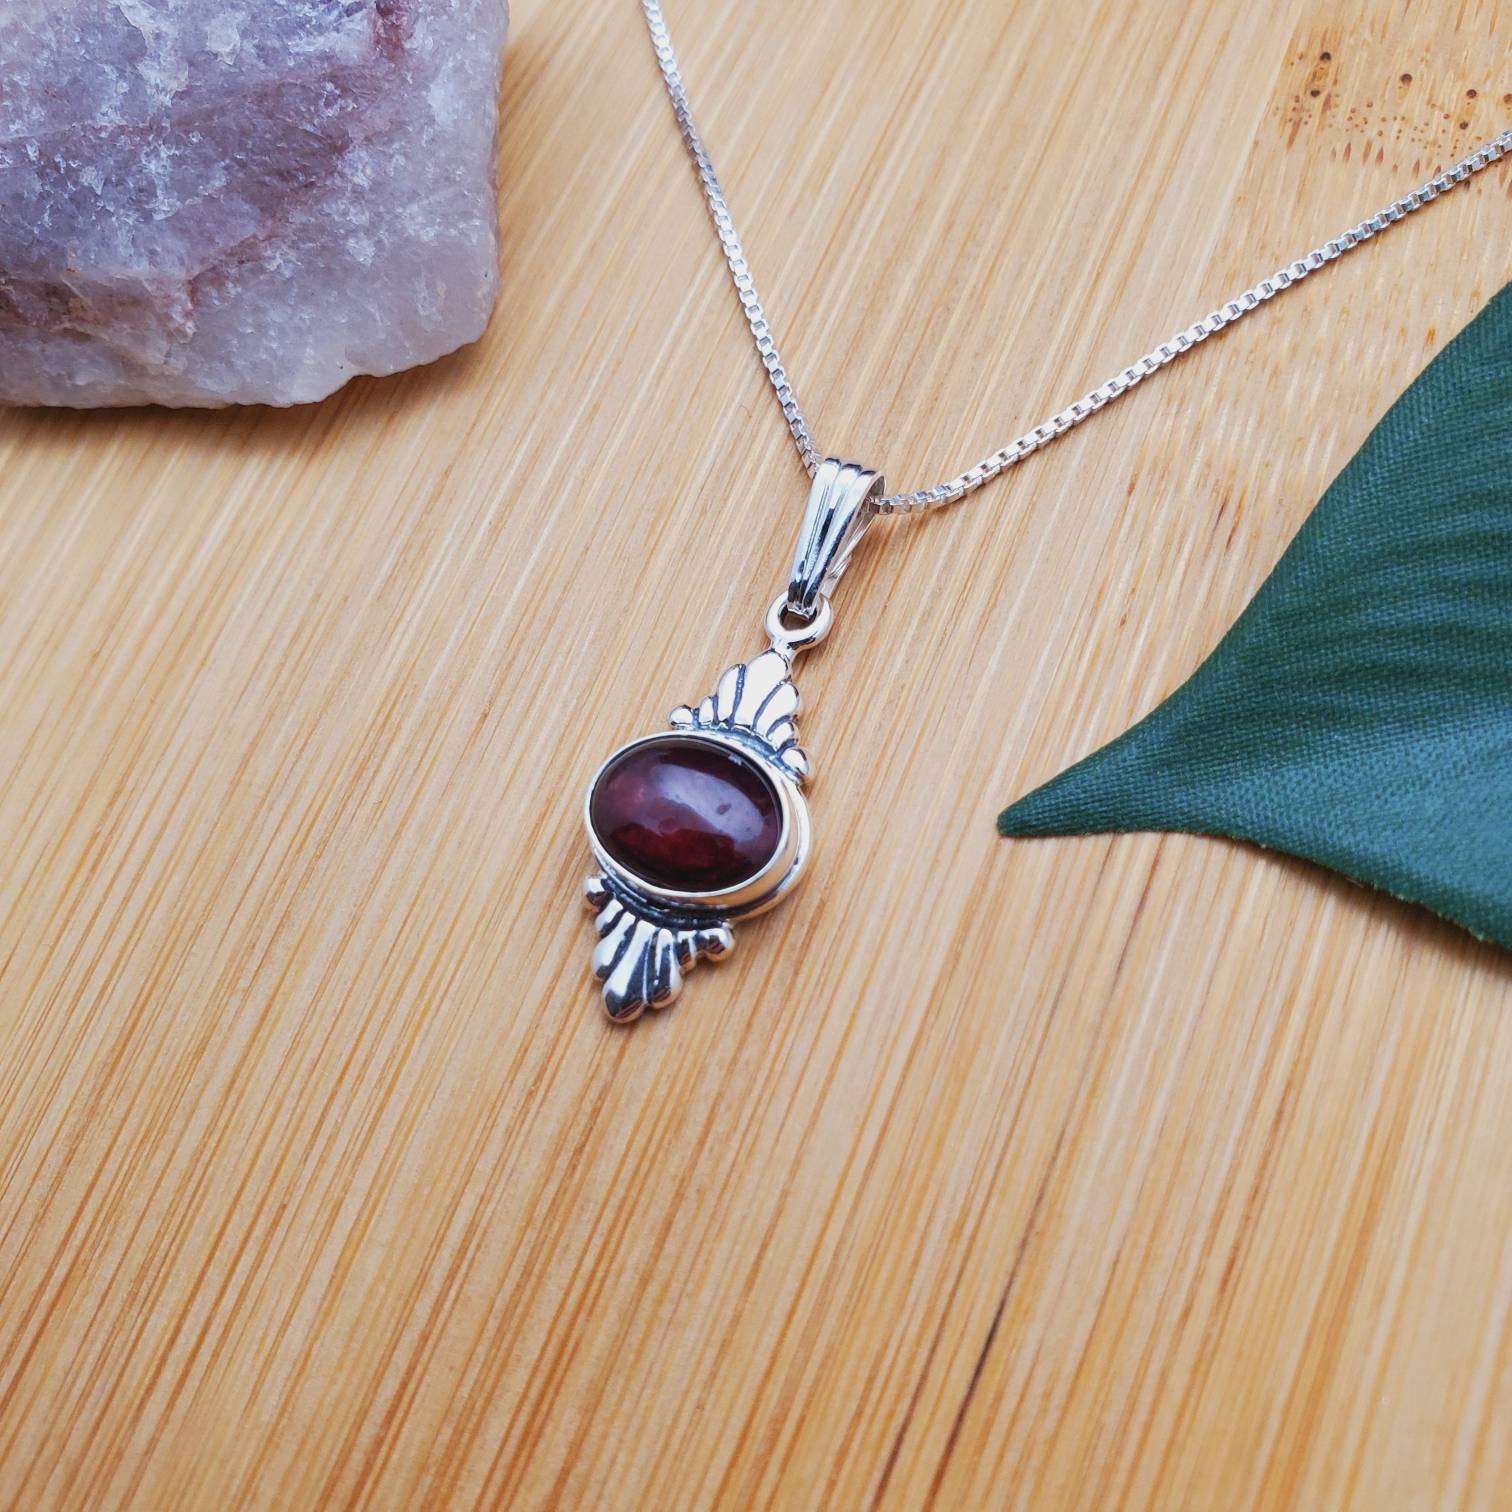 SoCute925 Dainty Red Garnet Necklace Pendant With Silver Box | Etsy